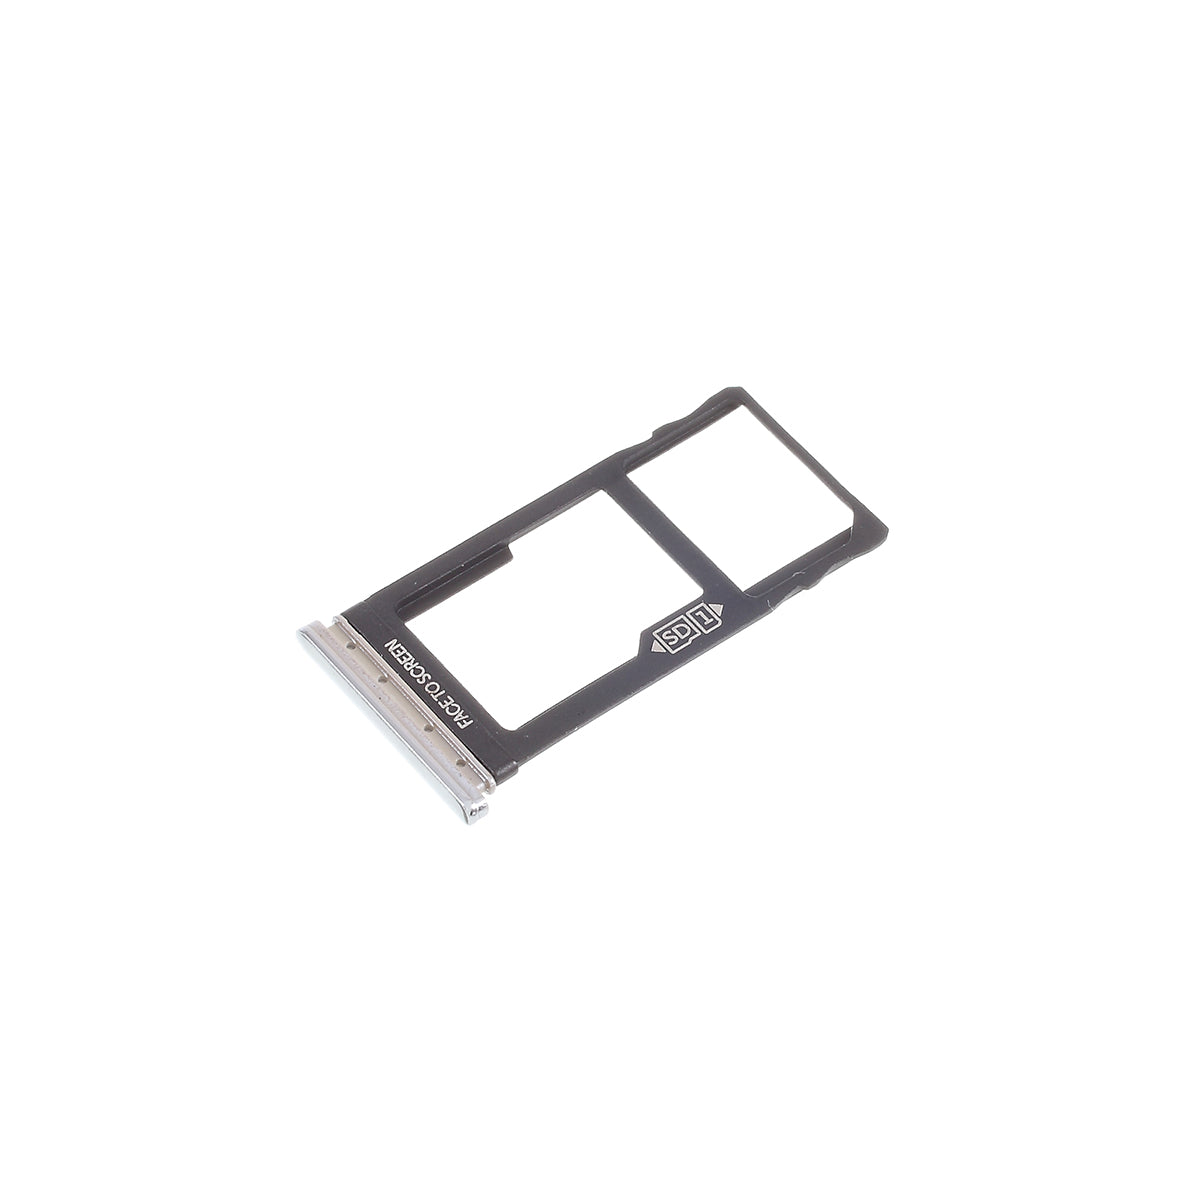 OEM Micro SD Card Tray Holder Replacement for Motorola One Vision P50 - Gold